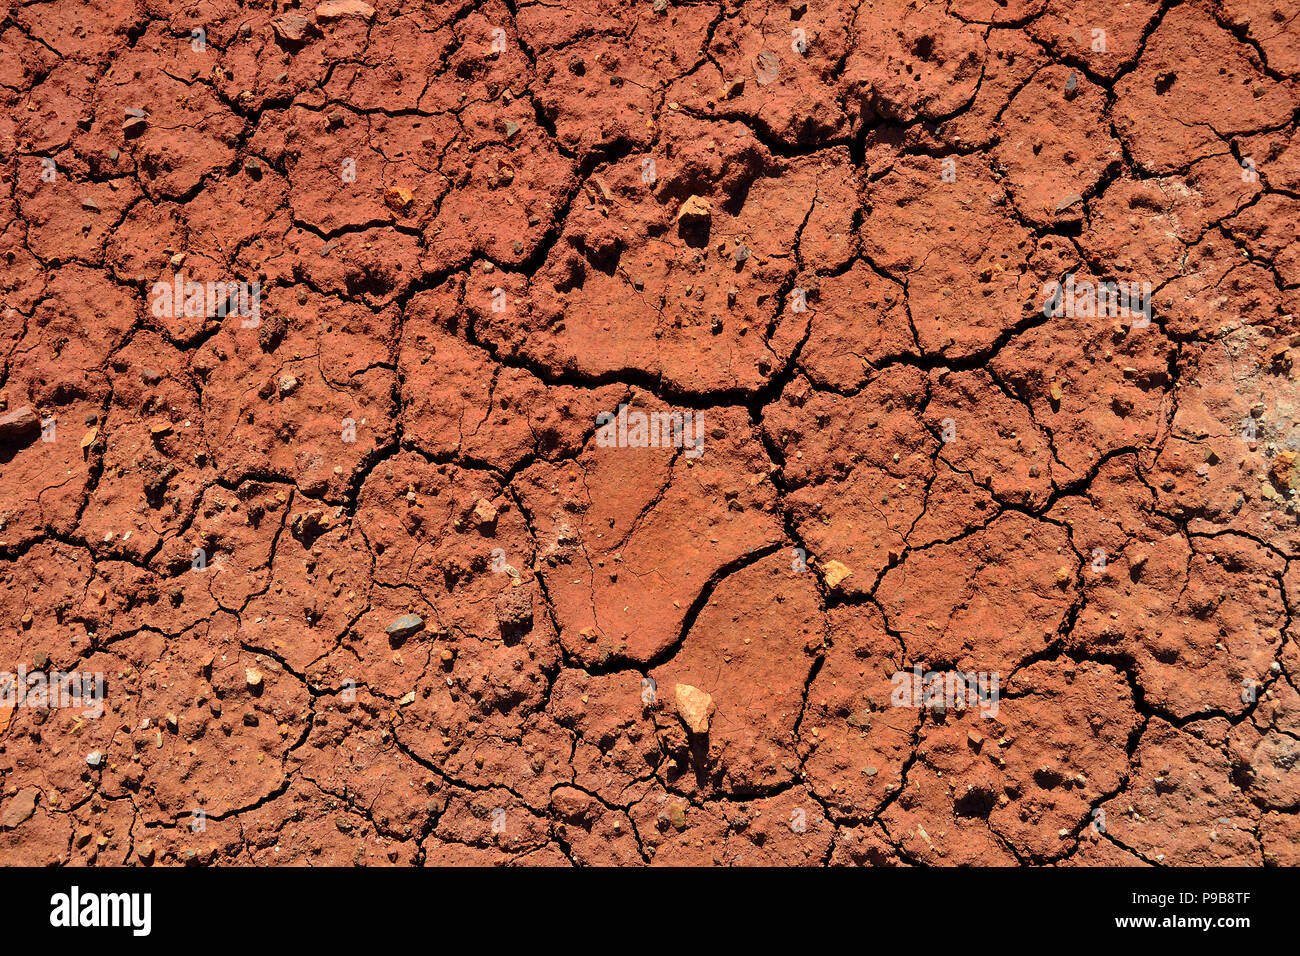 Texture of dry cracked clay soil - abstract natural summer background of clay desert cracked from drought Stock Photo